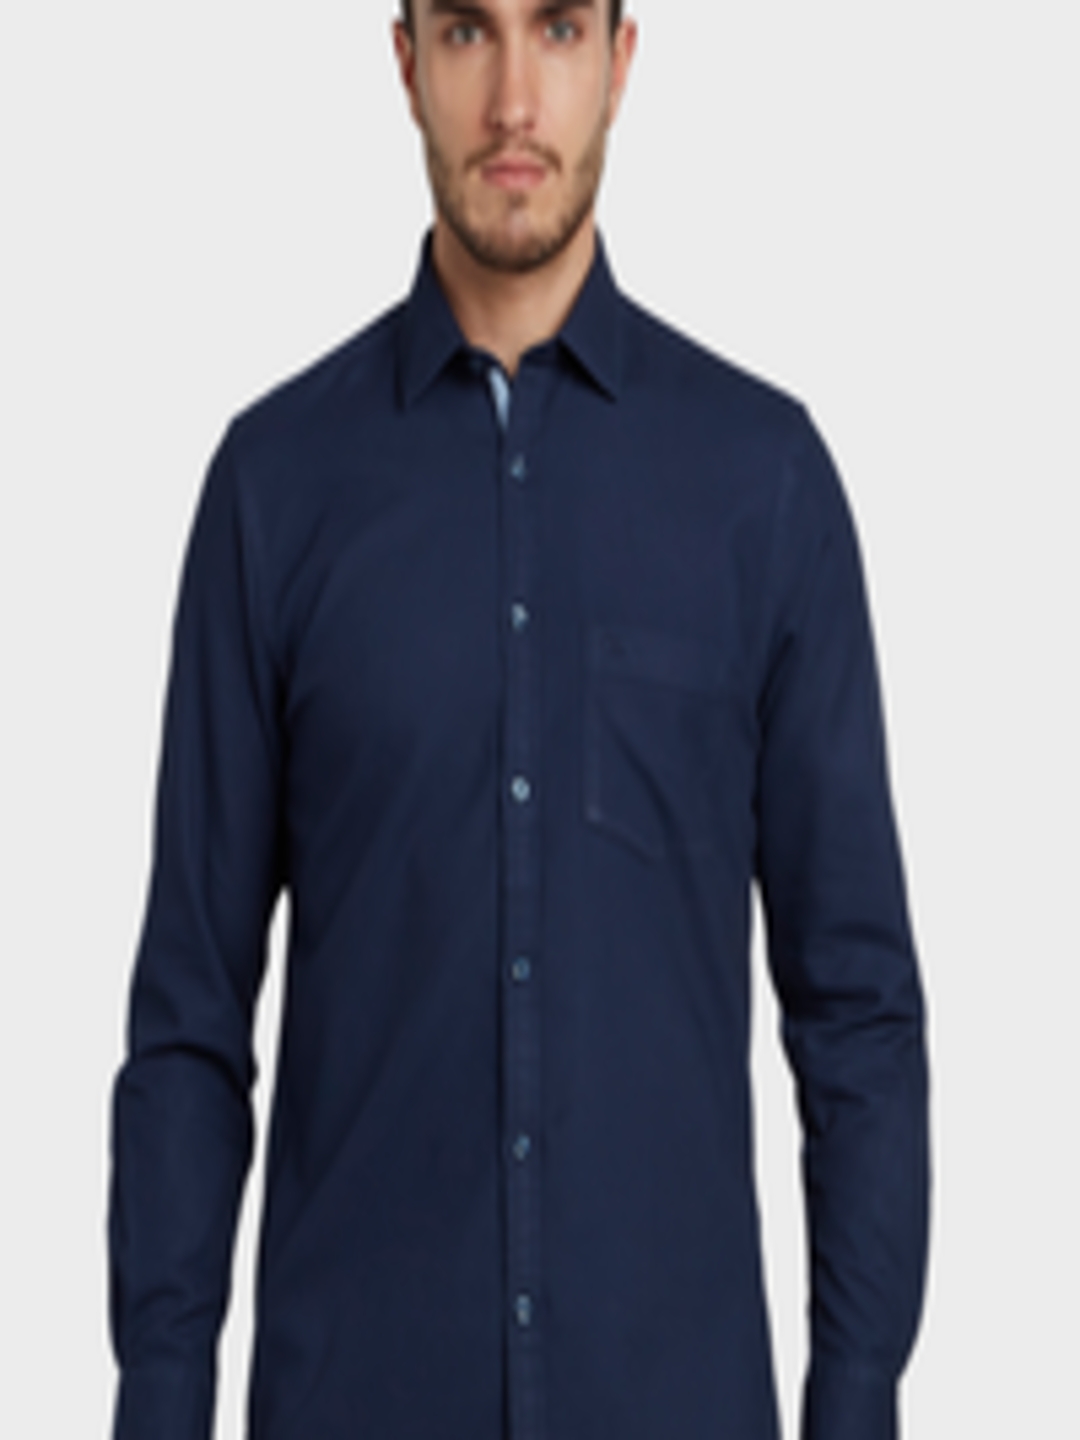 Buy ColorPlus Men Navy Blue Tailored Fit Solid Casual Shirt - Shirts ...